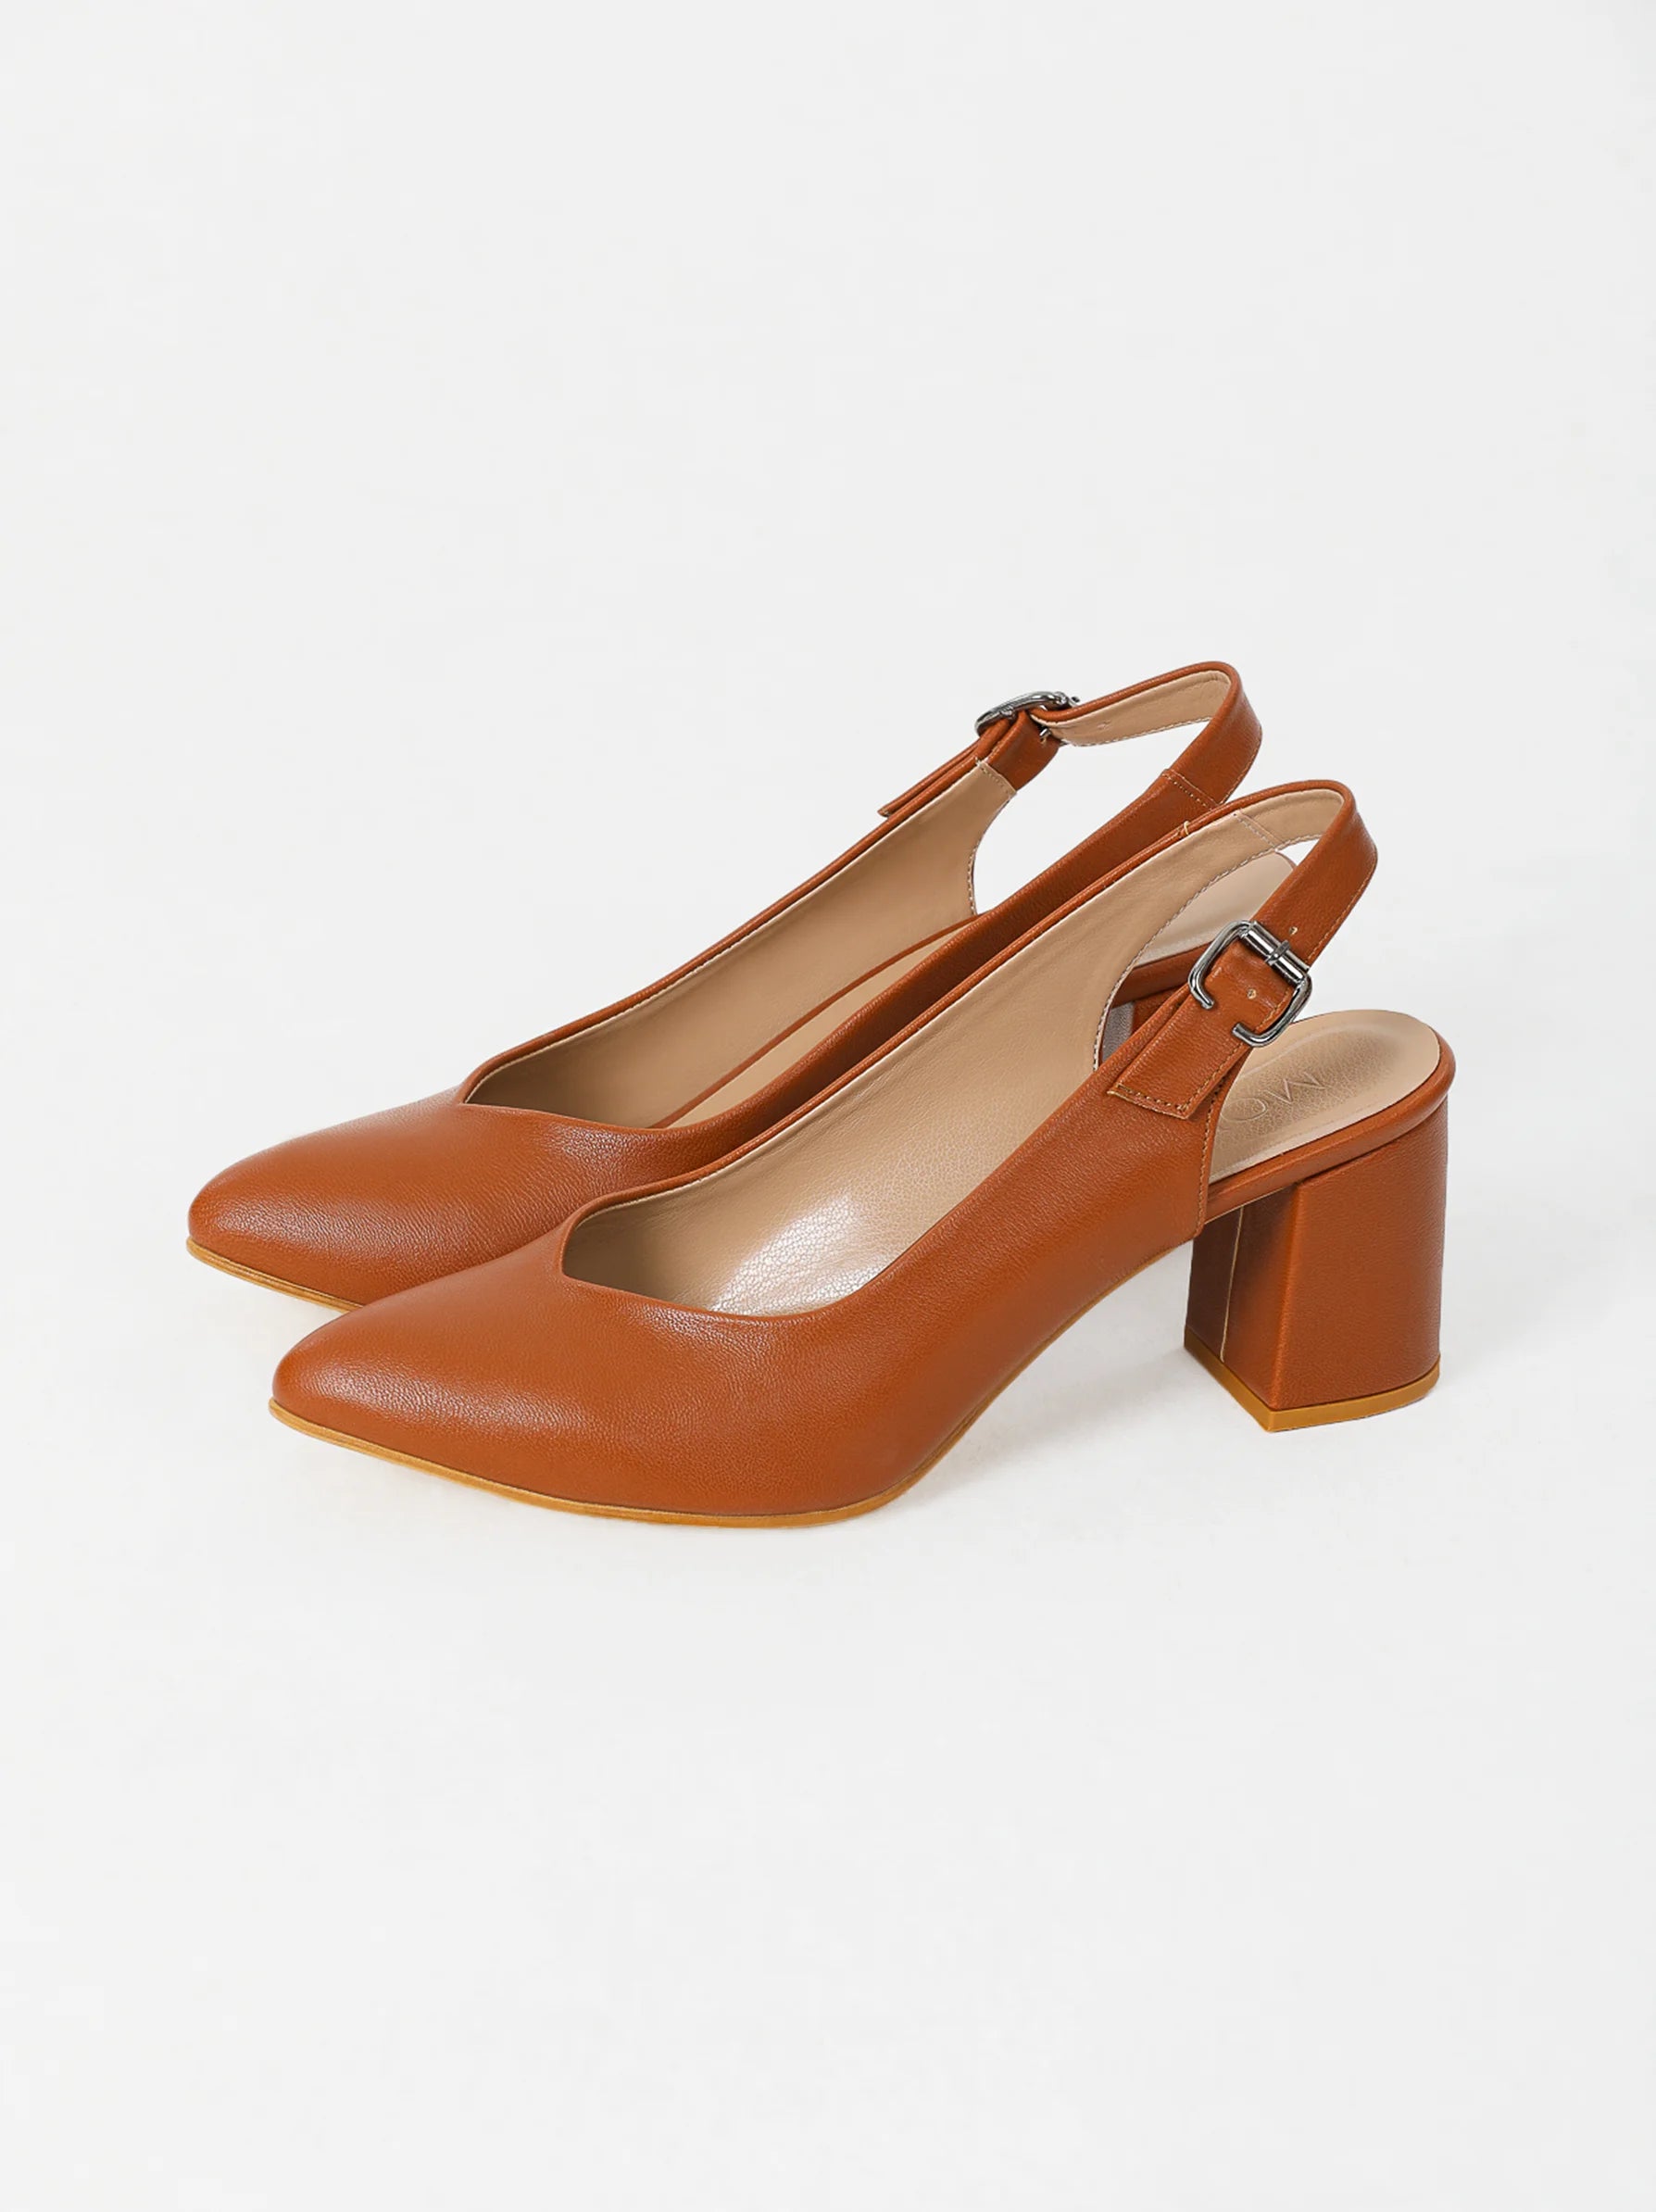 Low Block Barely There Heels | boohoo